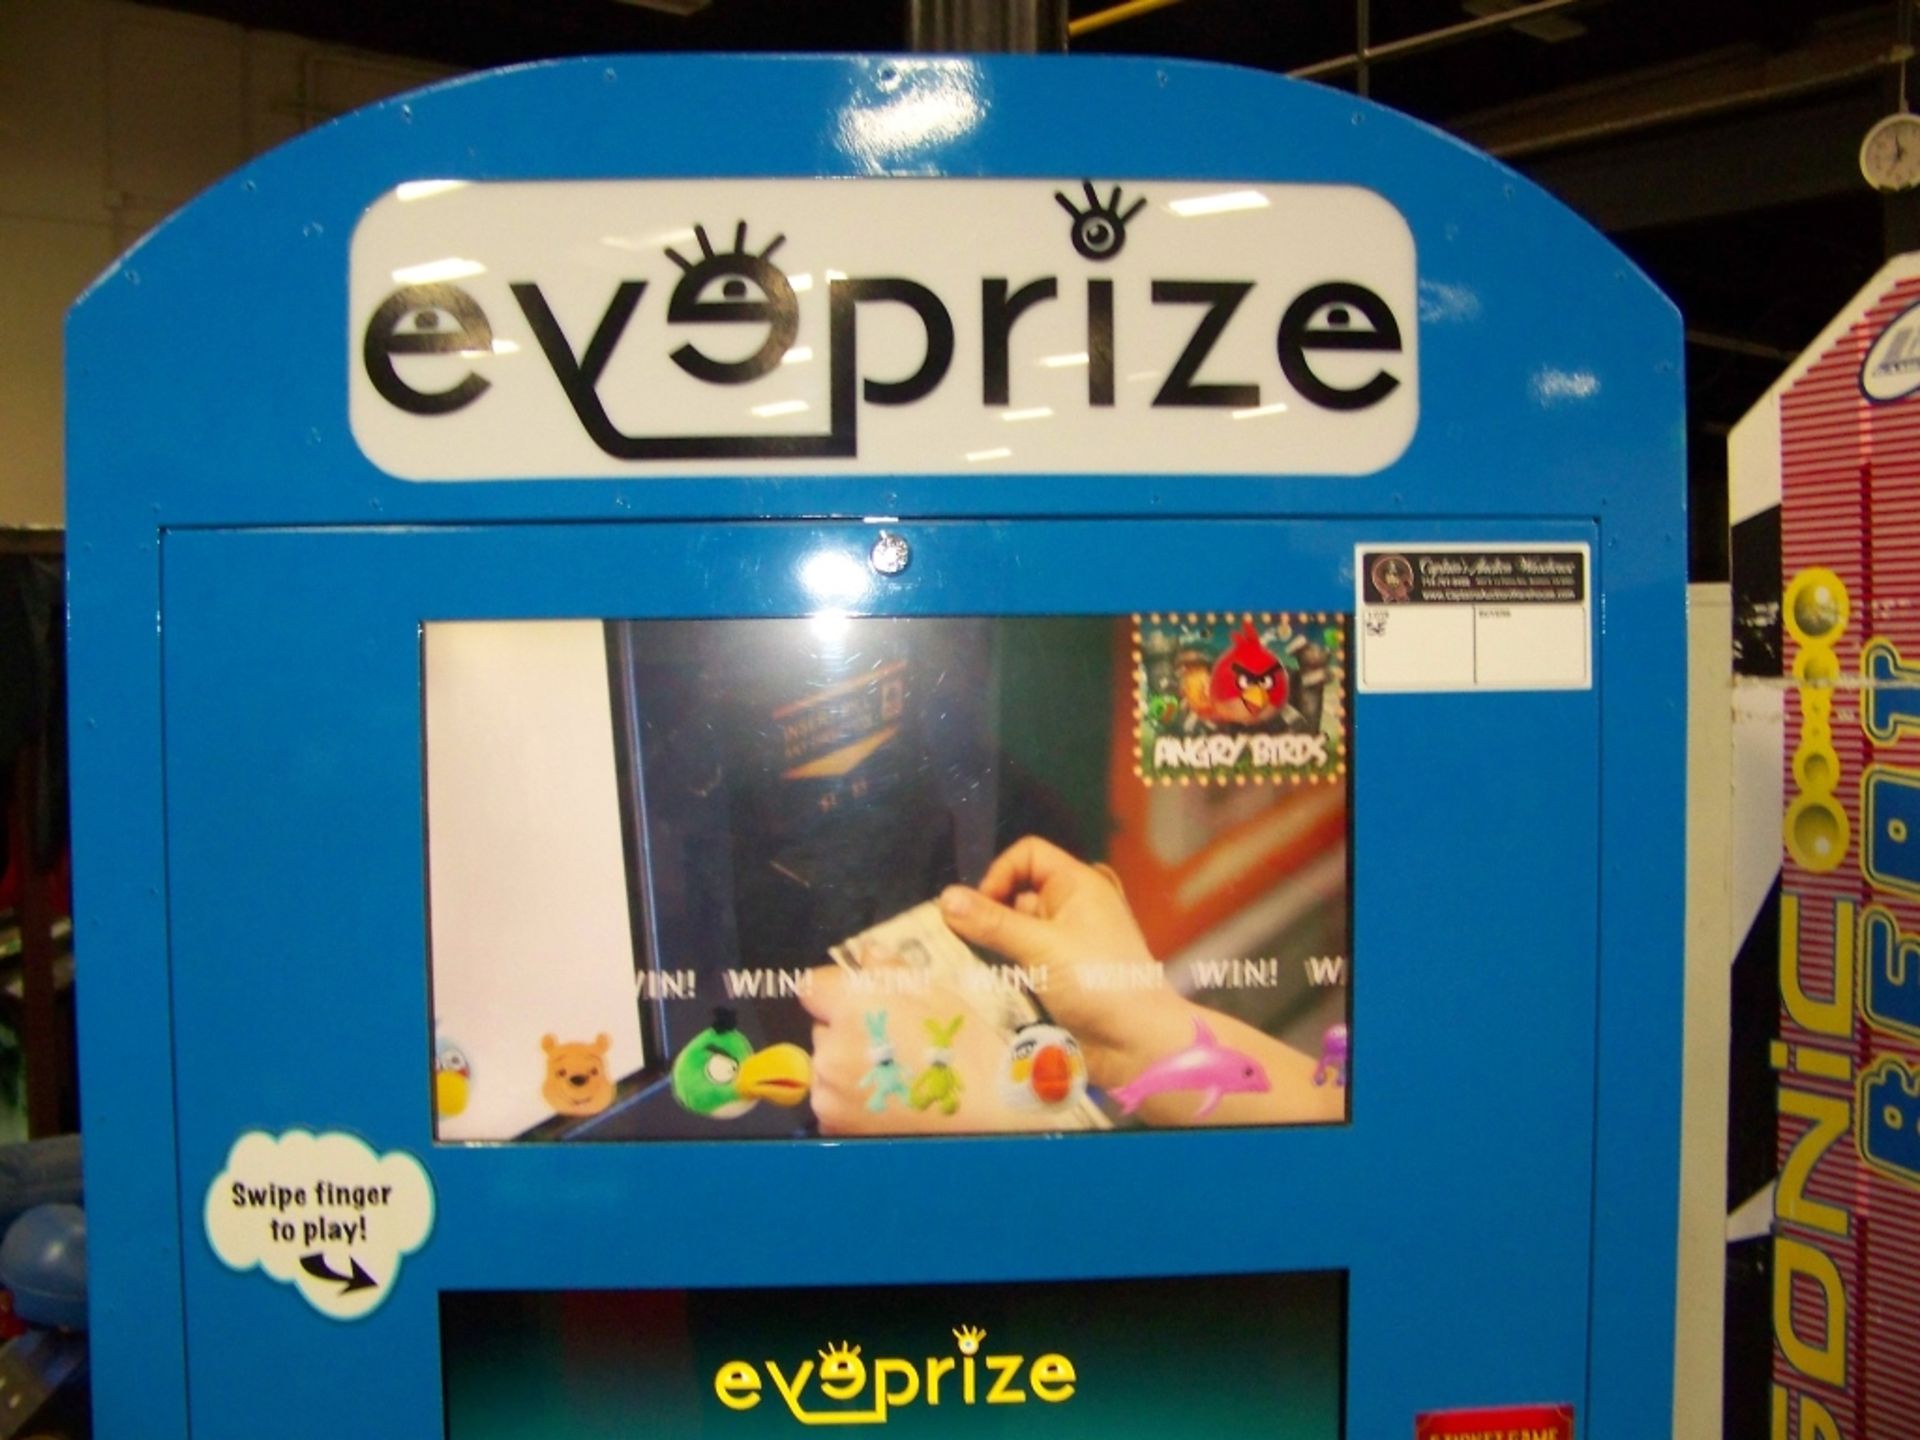 EYE PRIZE INSTANT CAPSULE PRIZE REDEMPTION GAME - Image 9 of 9